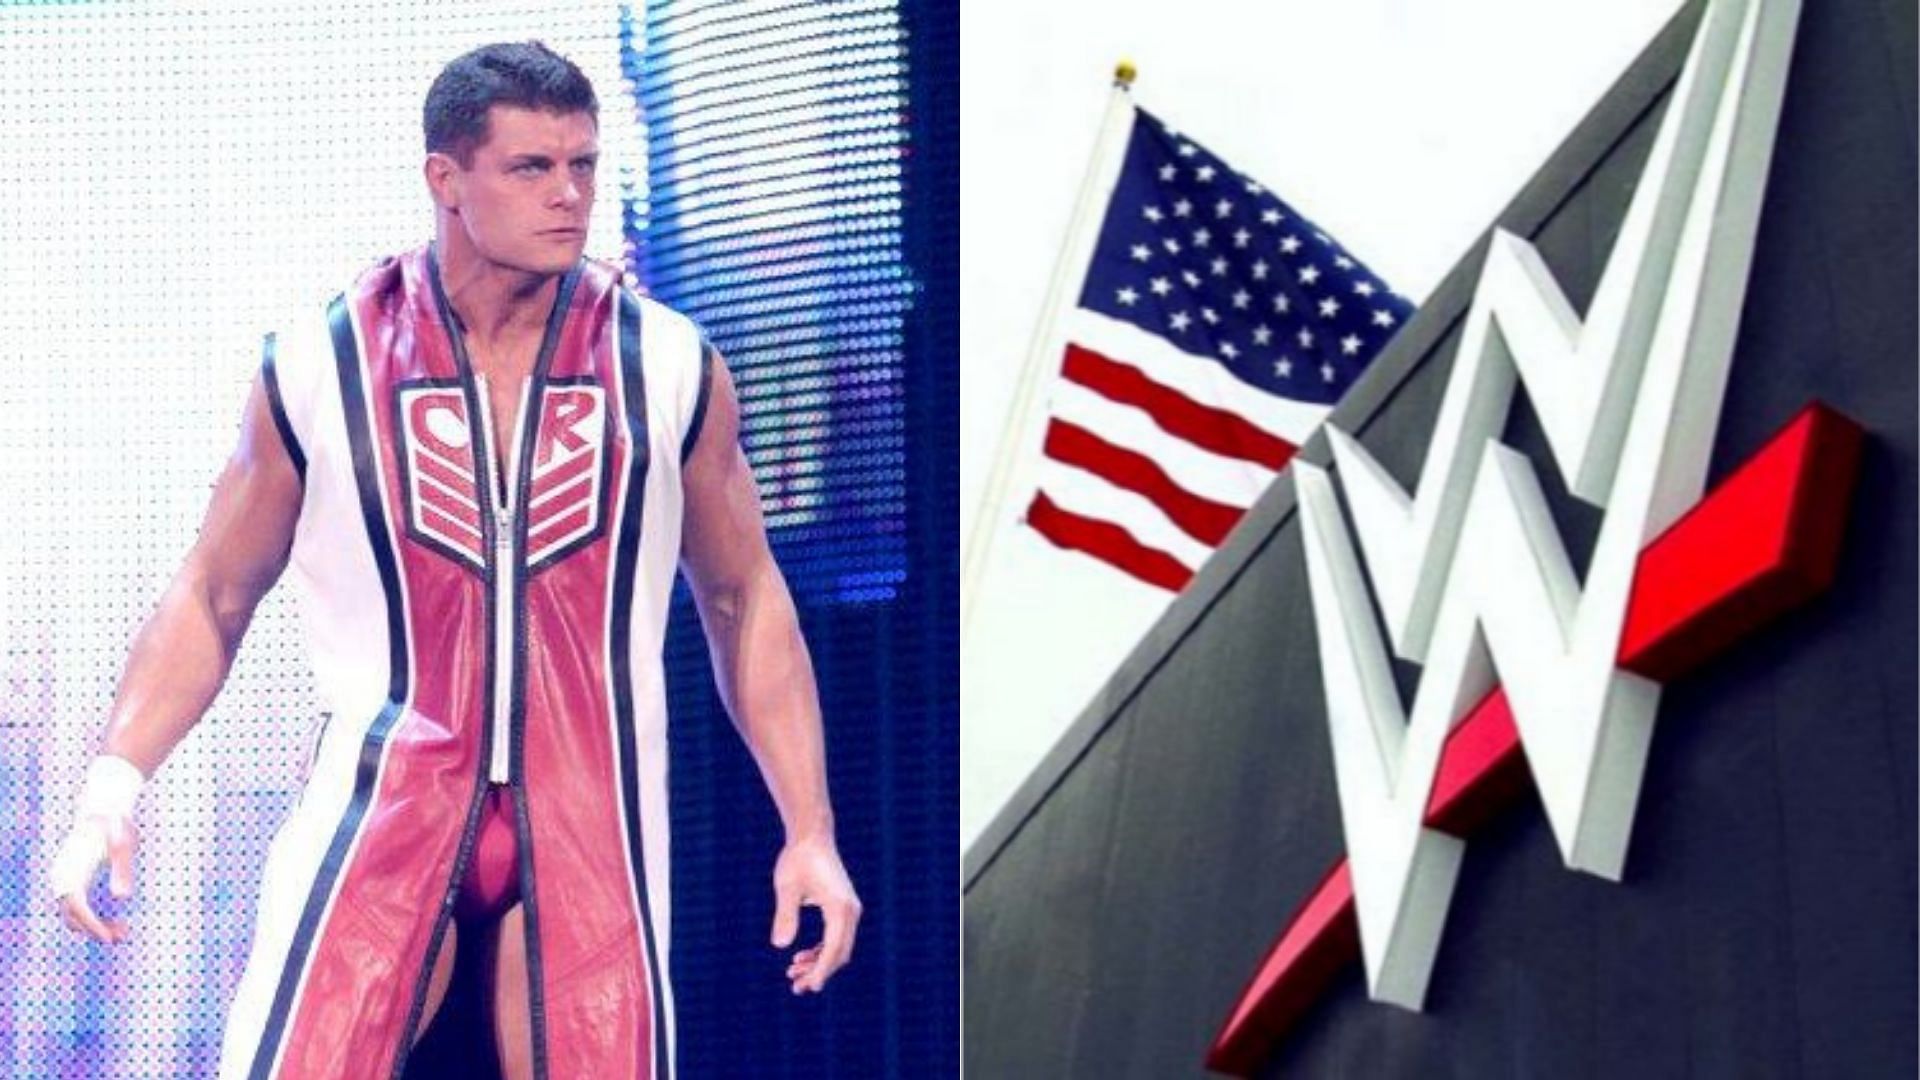 Cody Rhodes left WWE in 2016 after requesting his release